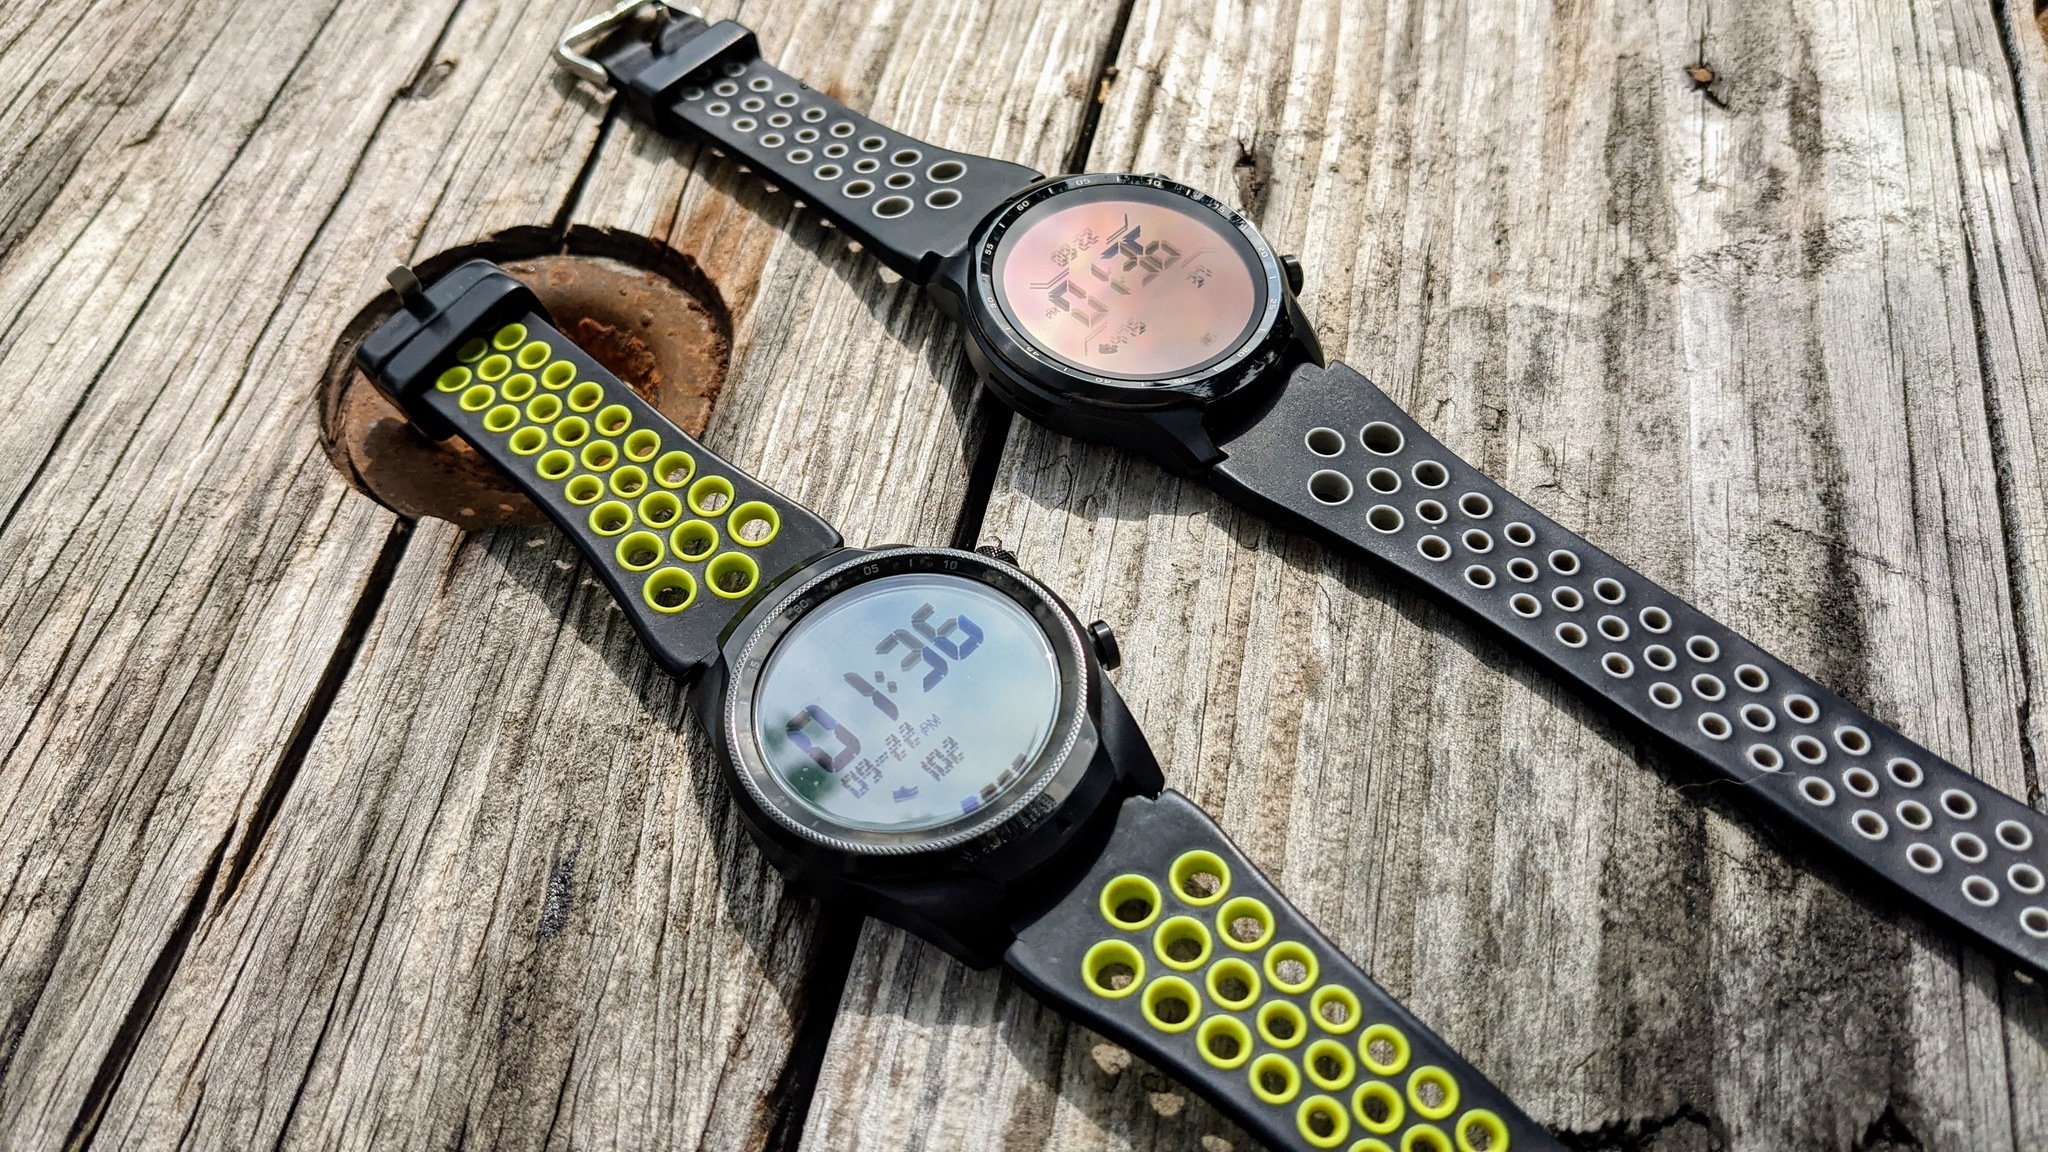 TicWatch Smartwatch and Smart Products